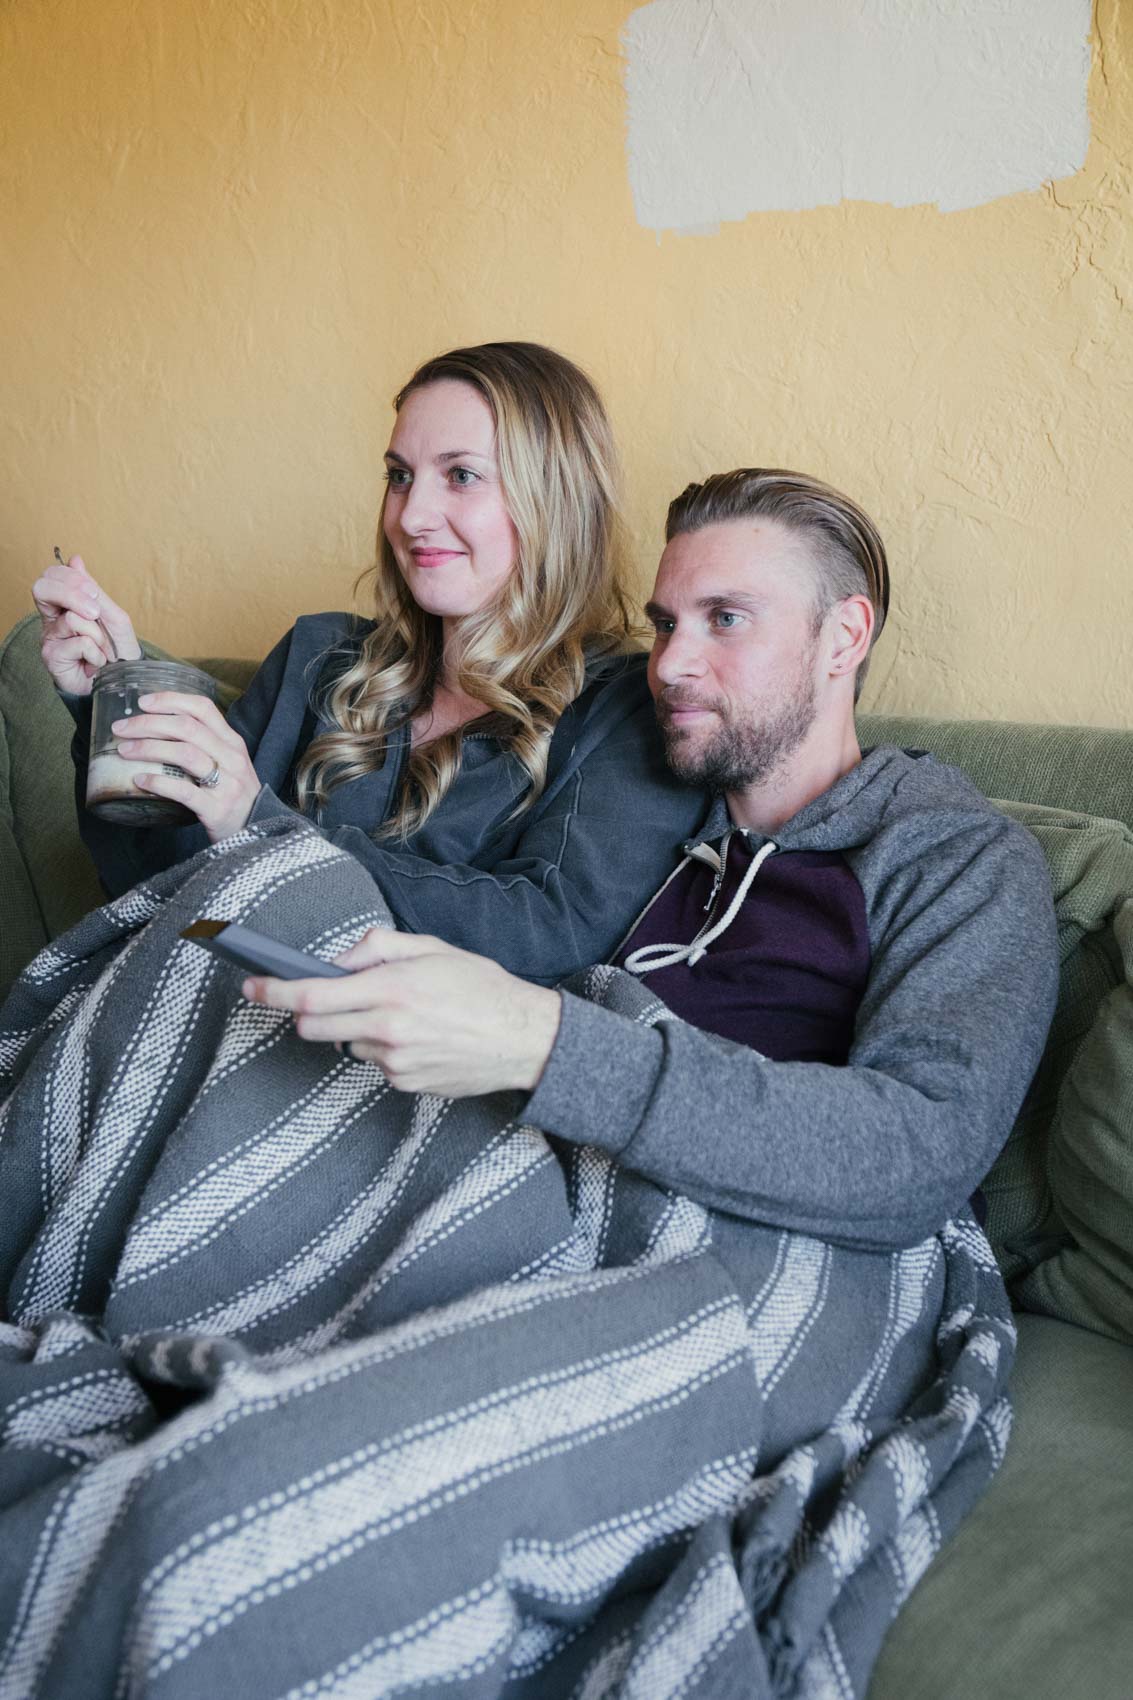 Allyn Lewis and Shaun Novak watching movies with Xfinity on Demand